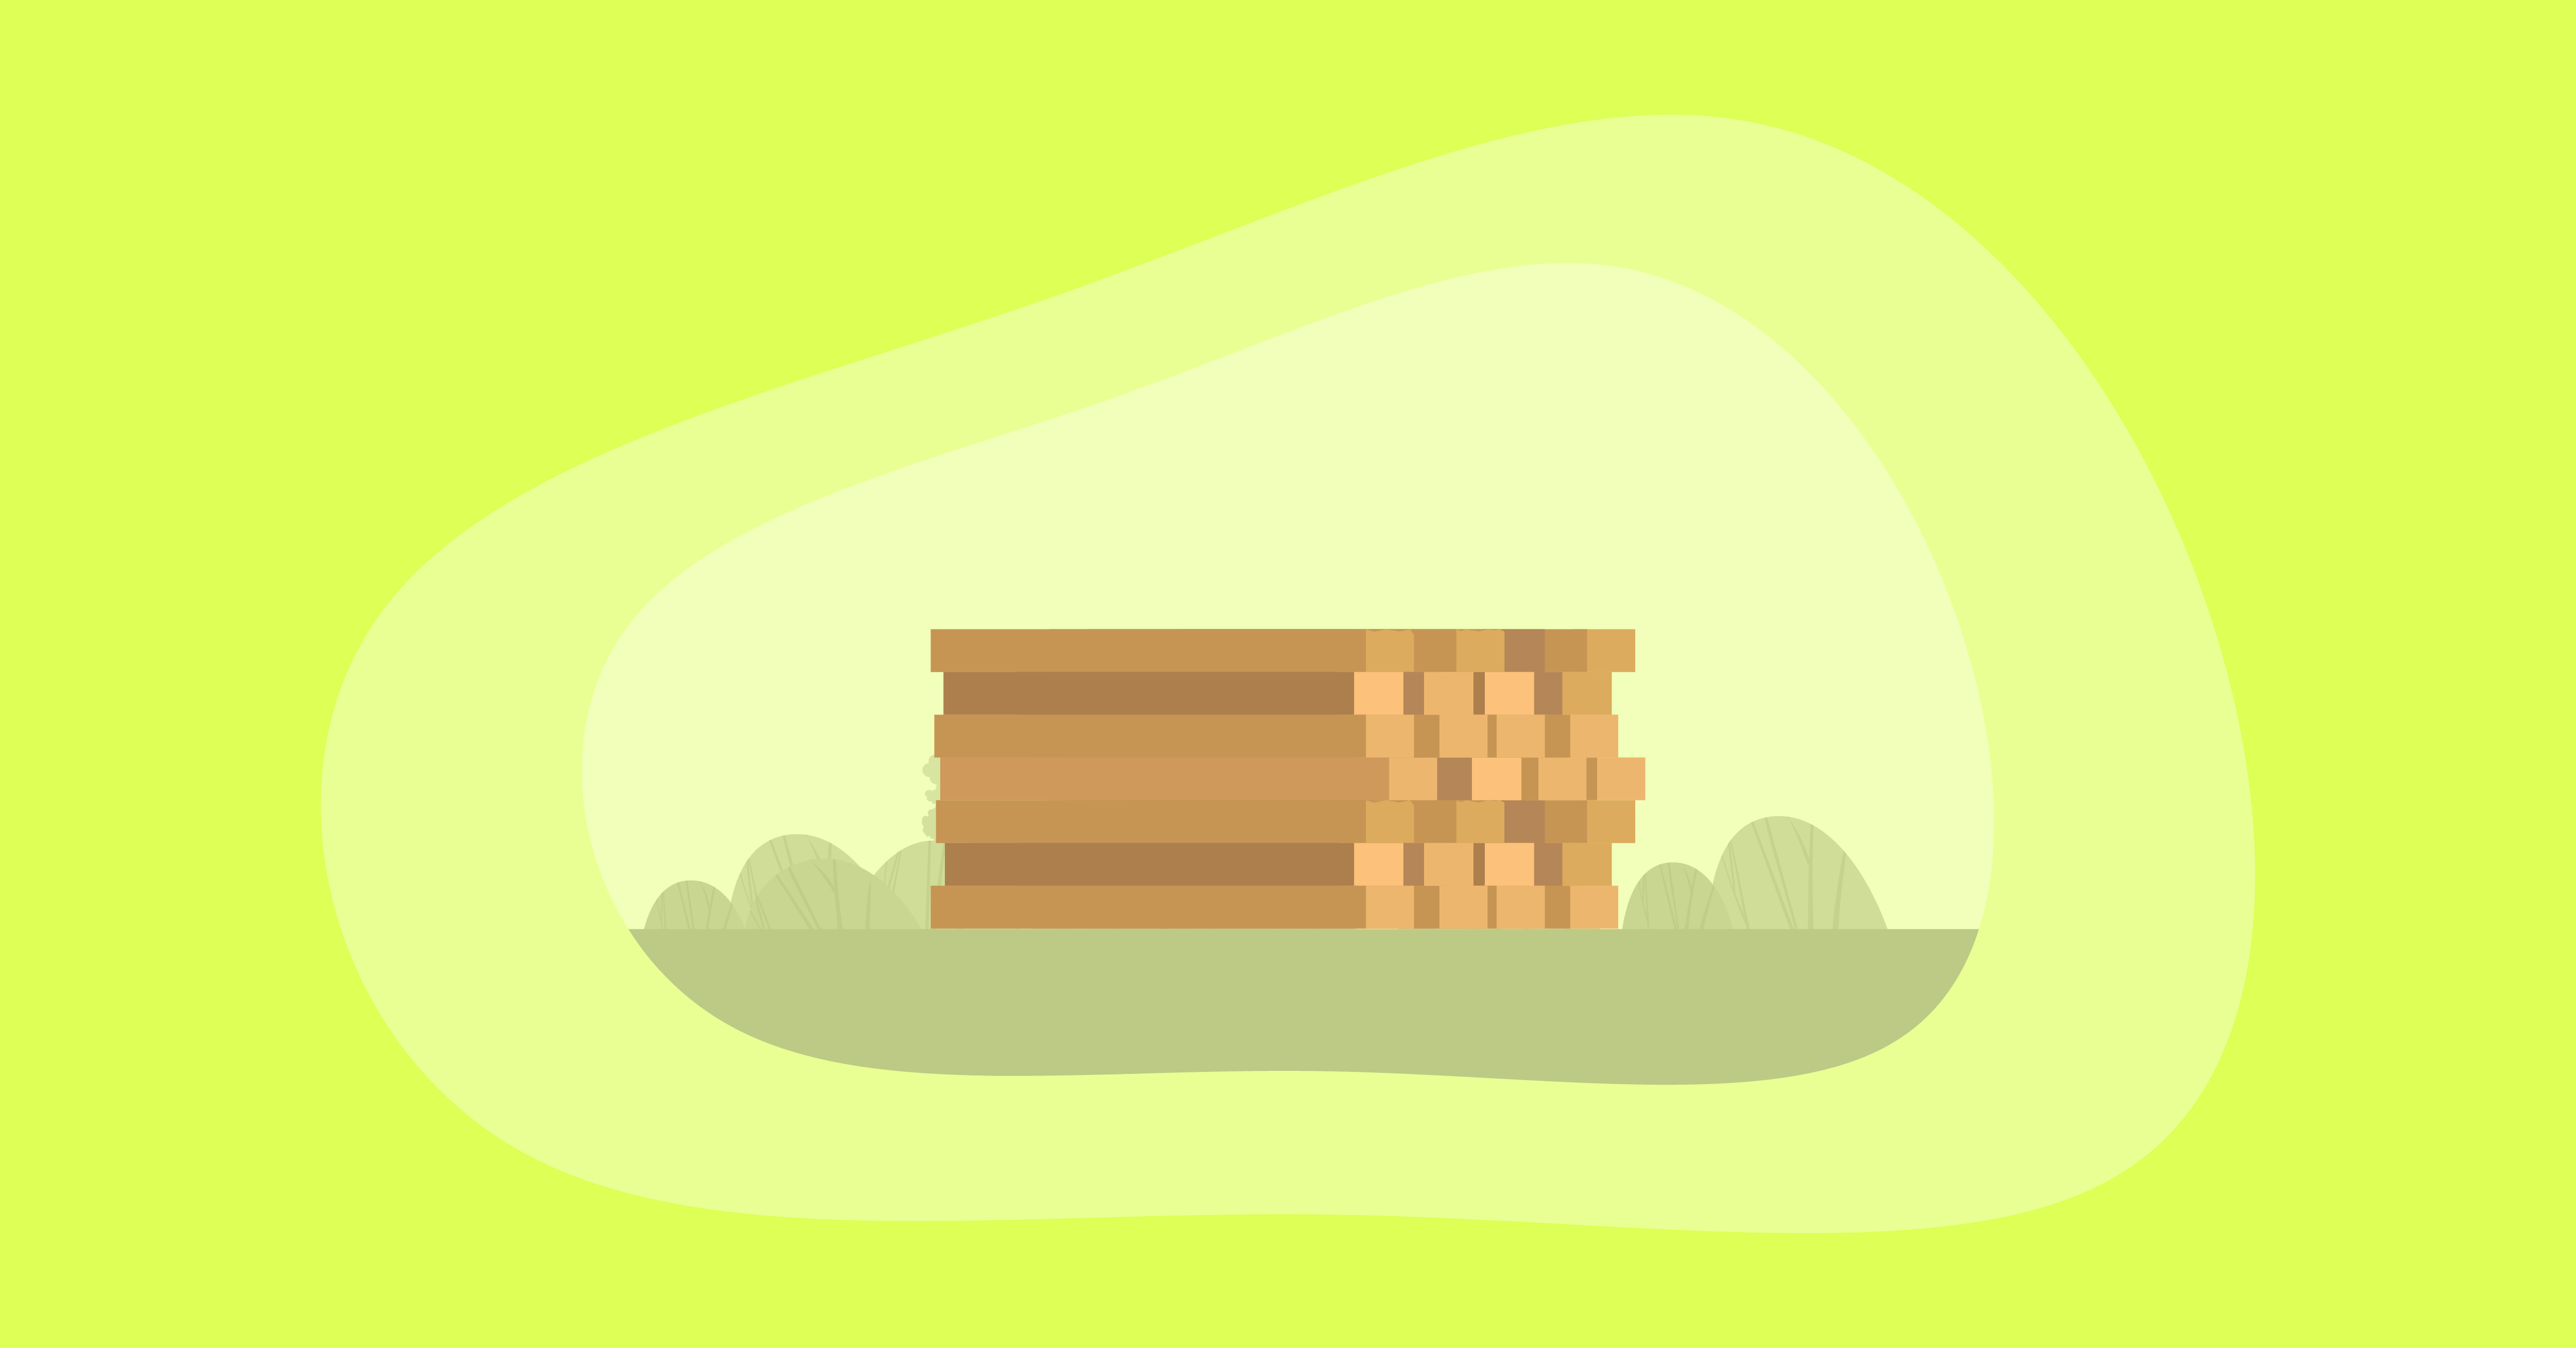 Illustration of a pile of reclaimed wood